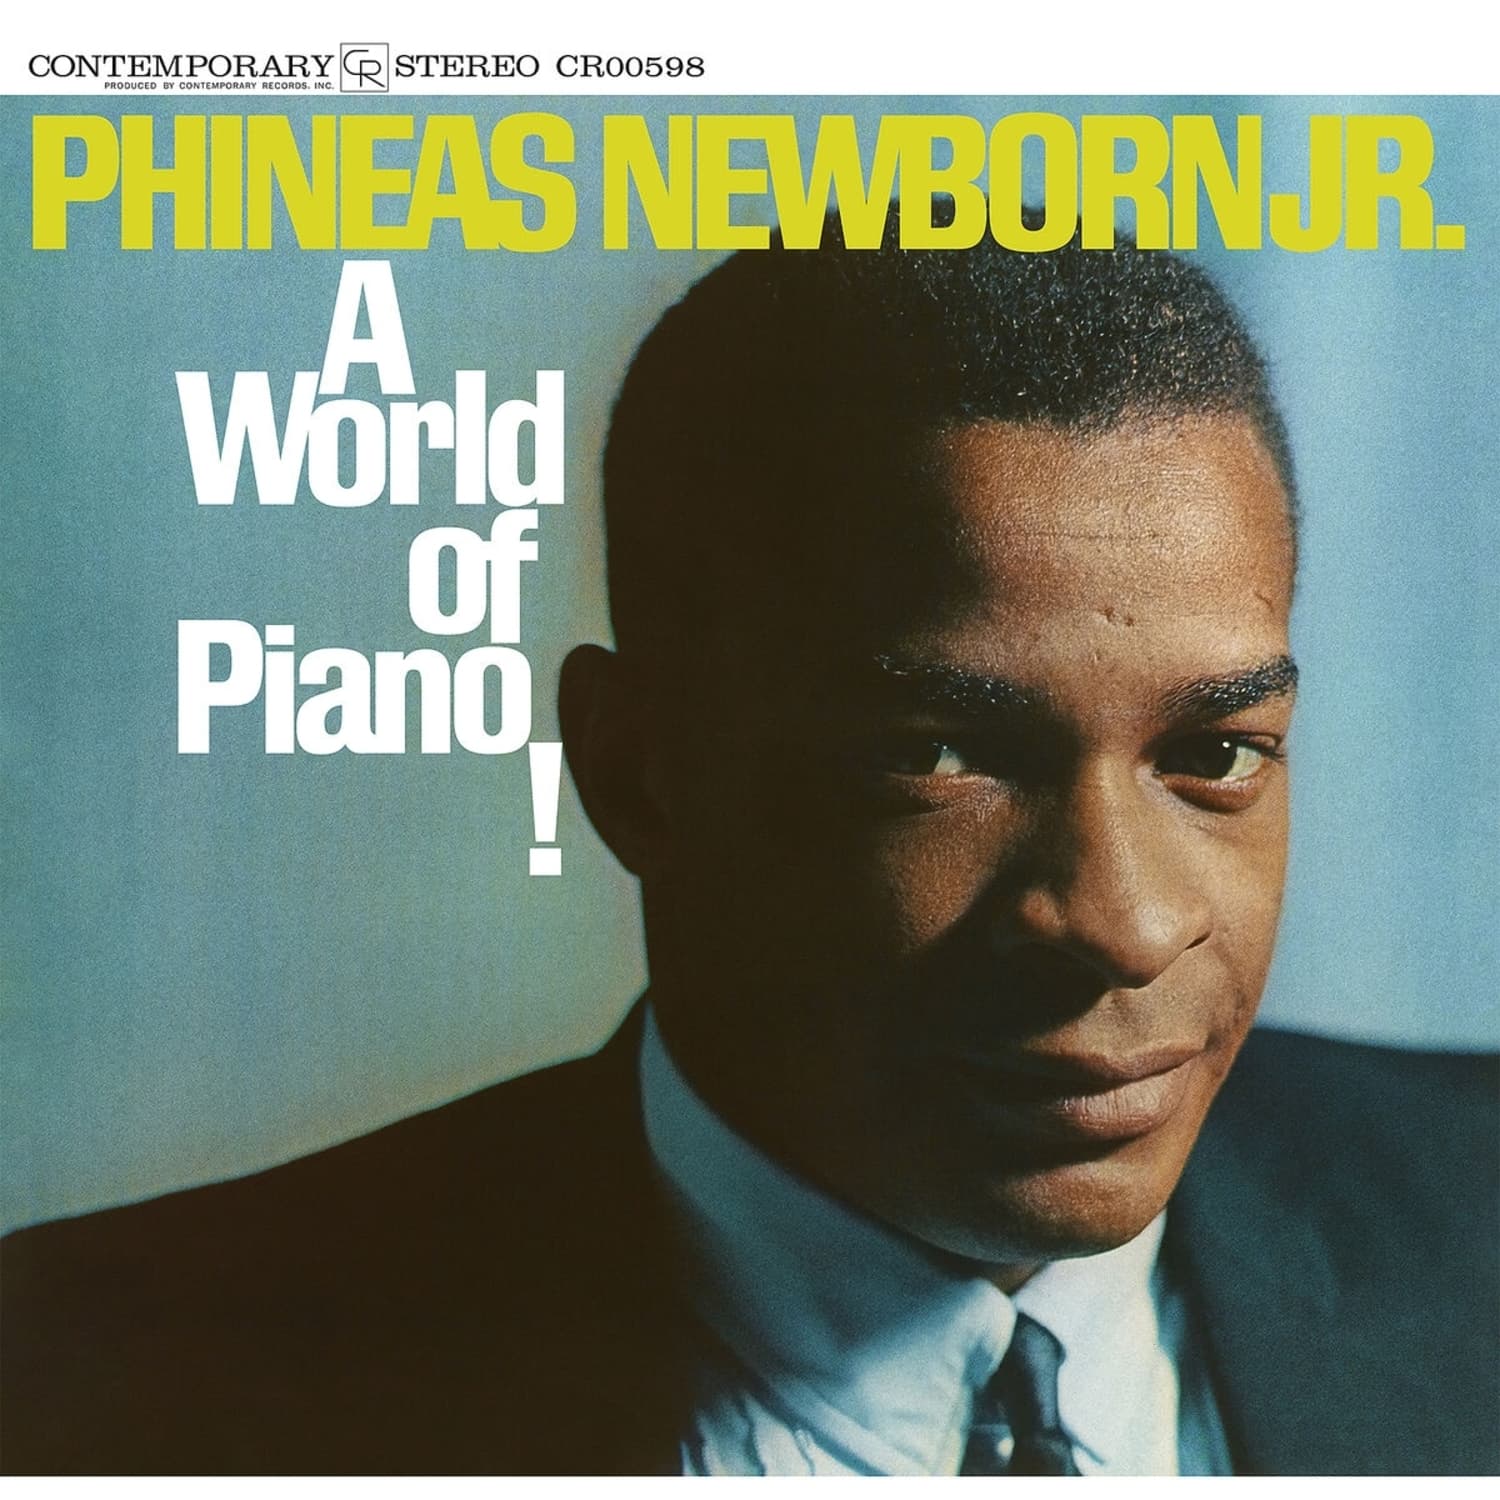 Phineas Newborn JR. - A WORLD OF PIANO! 